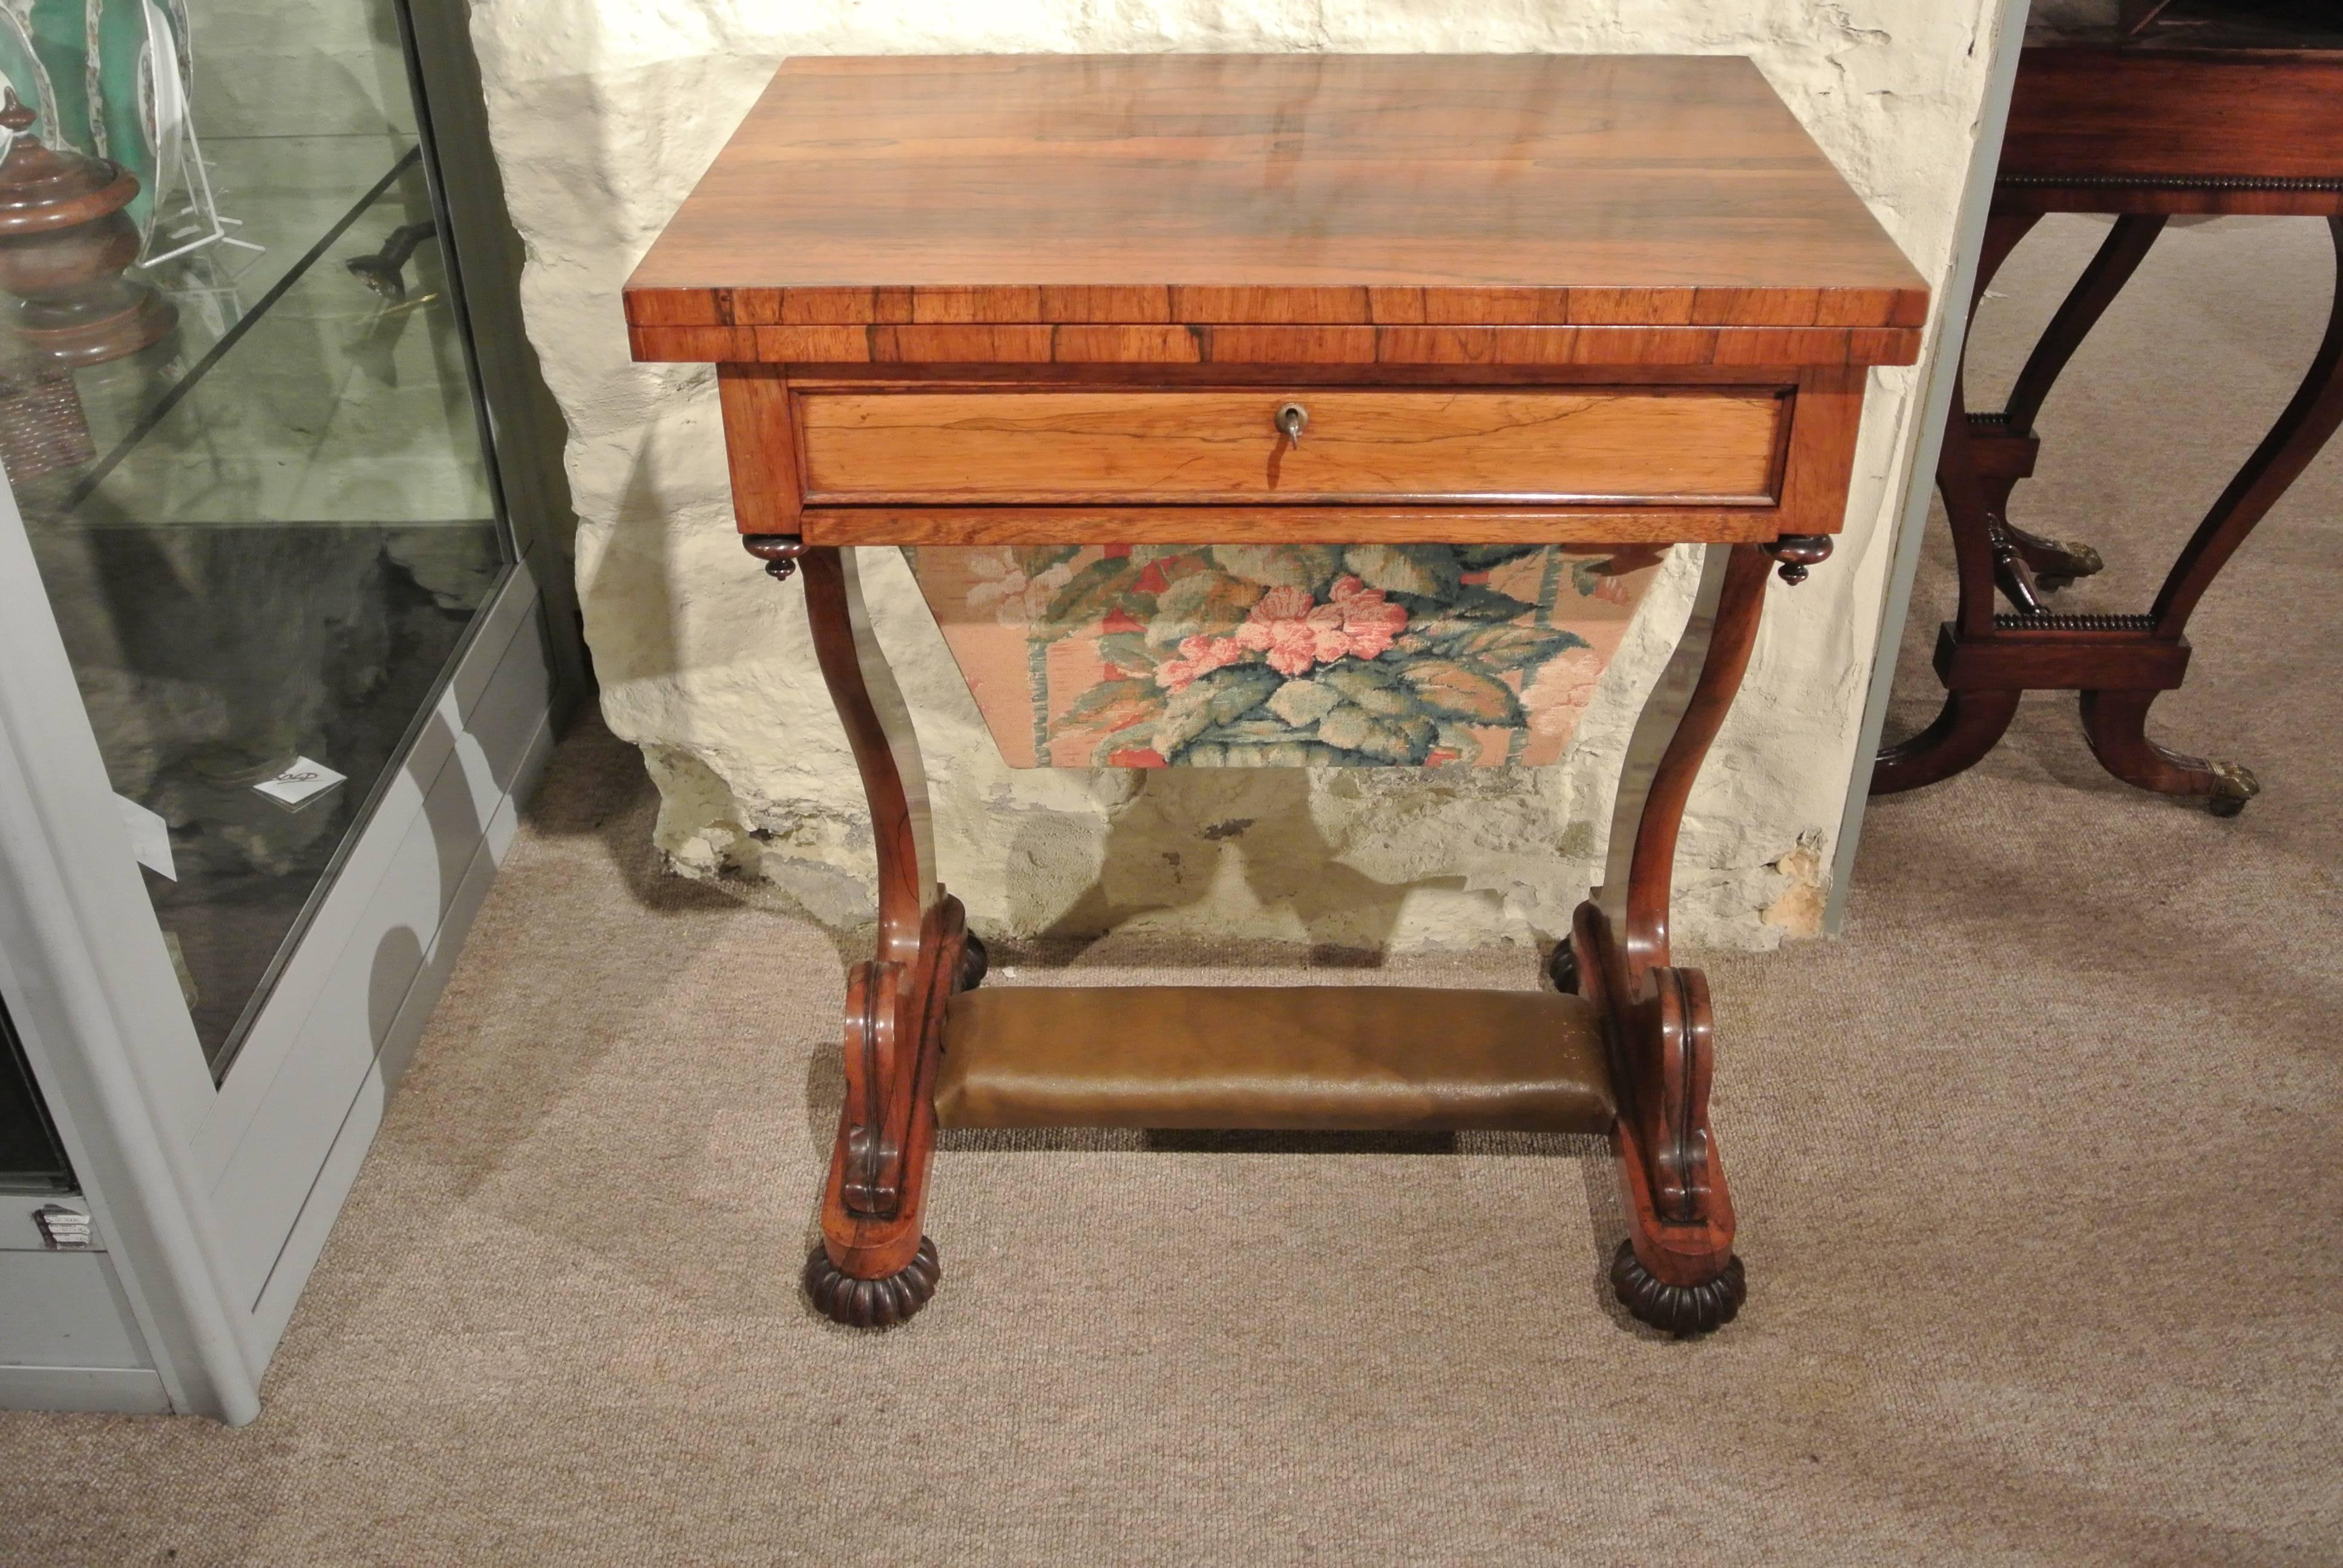 A fine quality Regency rosewood lamp table and sewing box with 'S' shape supports, opening up to a leathered card table. In the manner of Gillows.